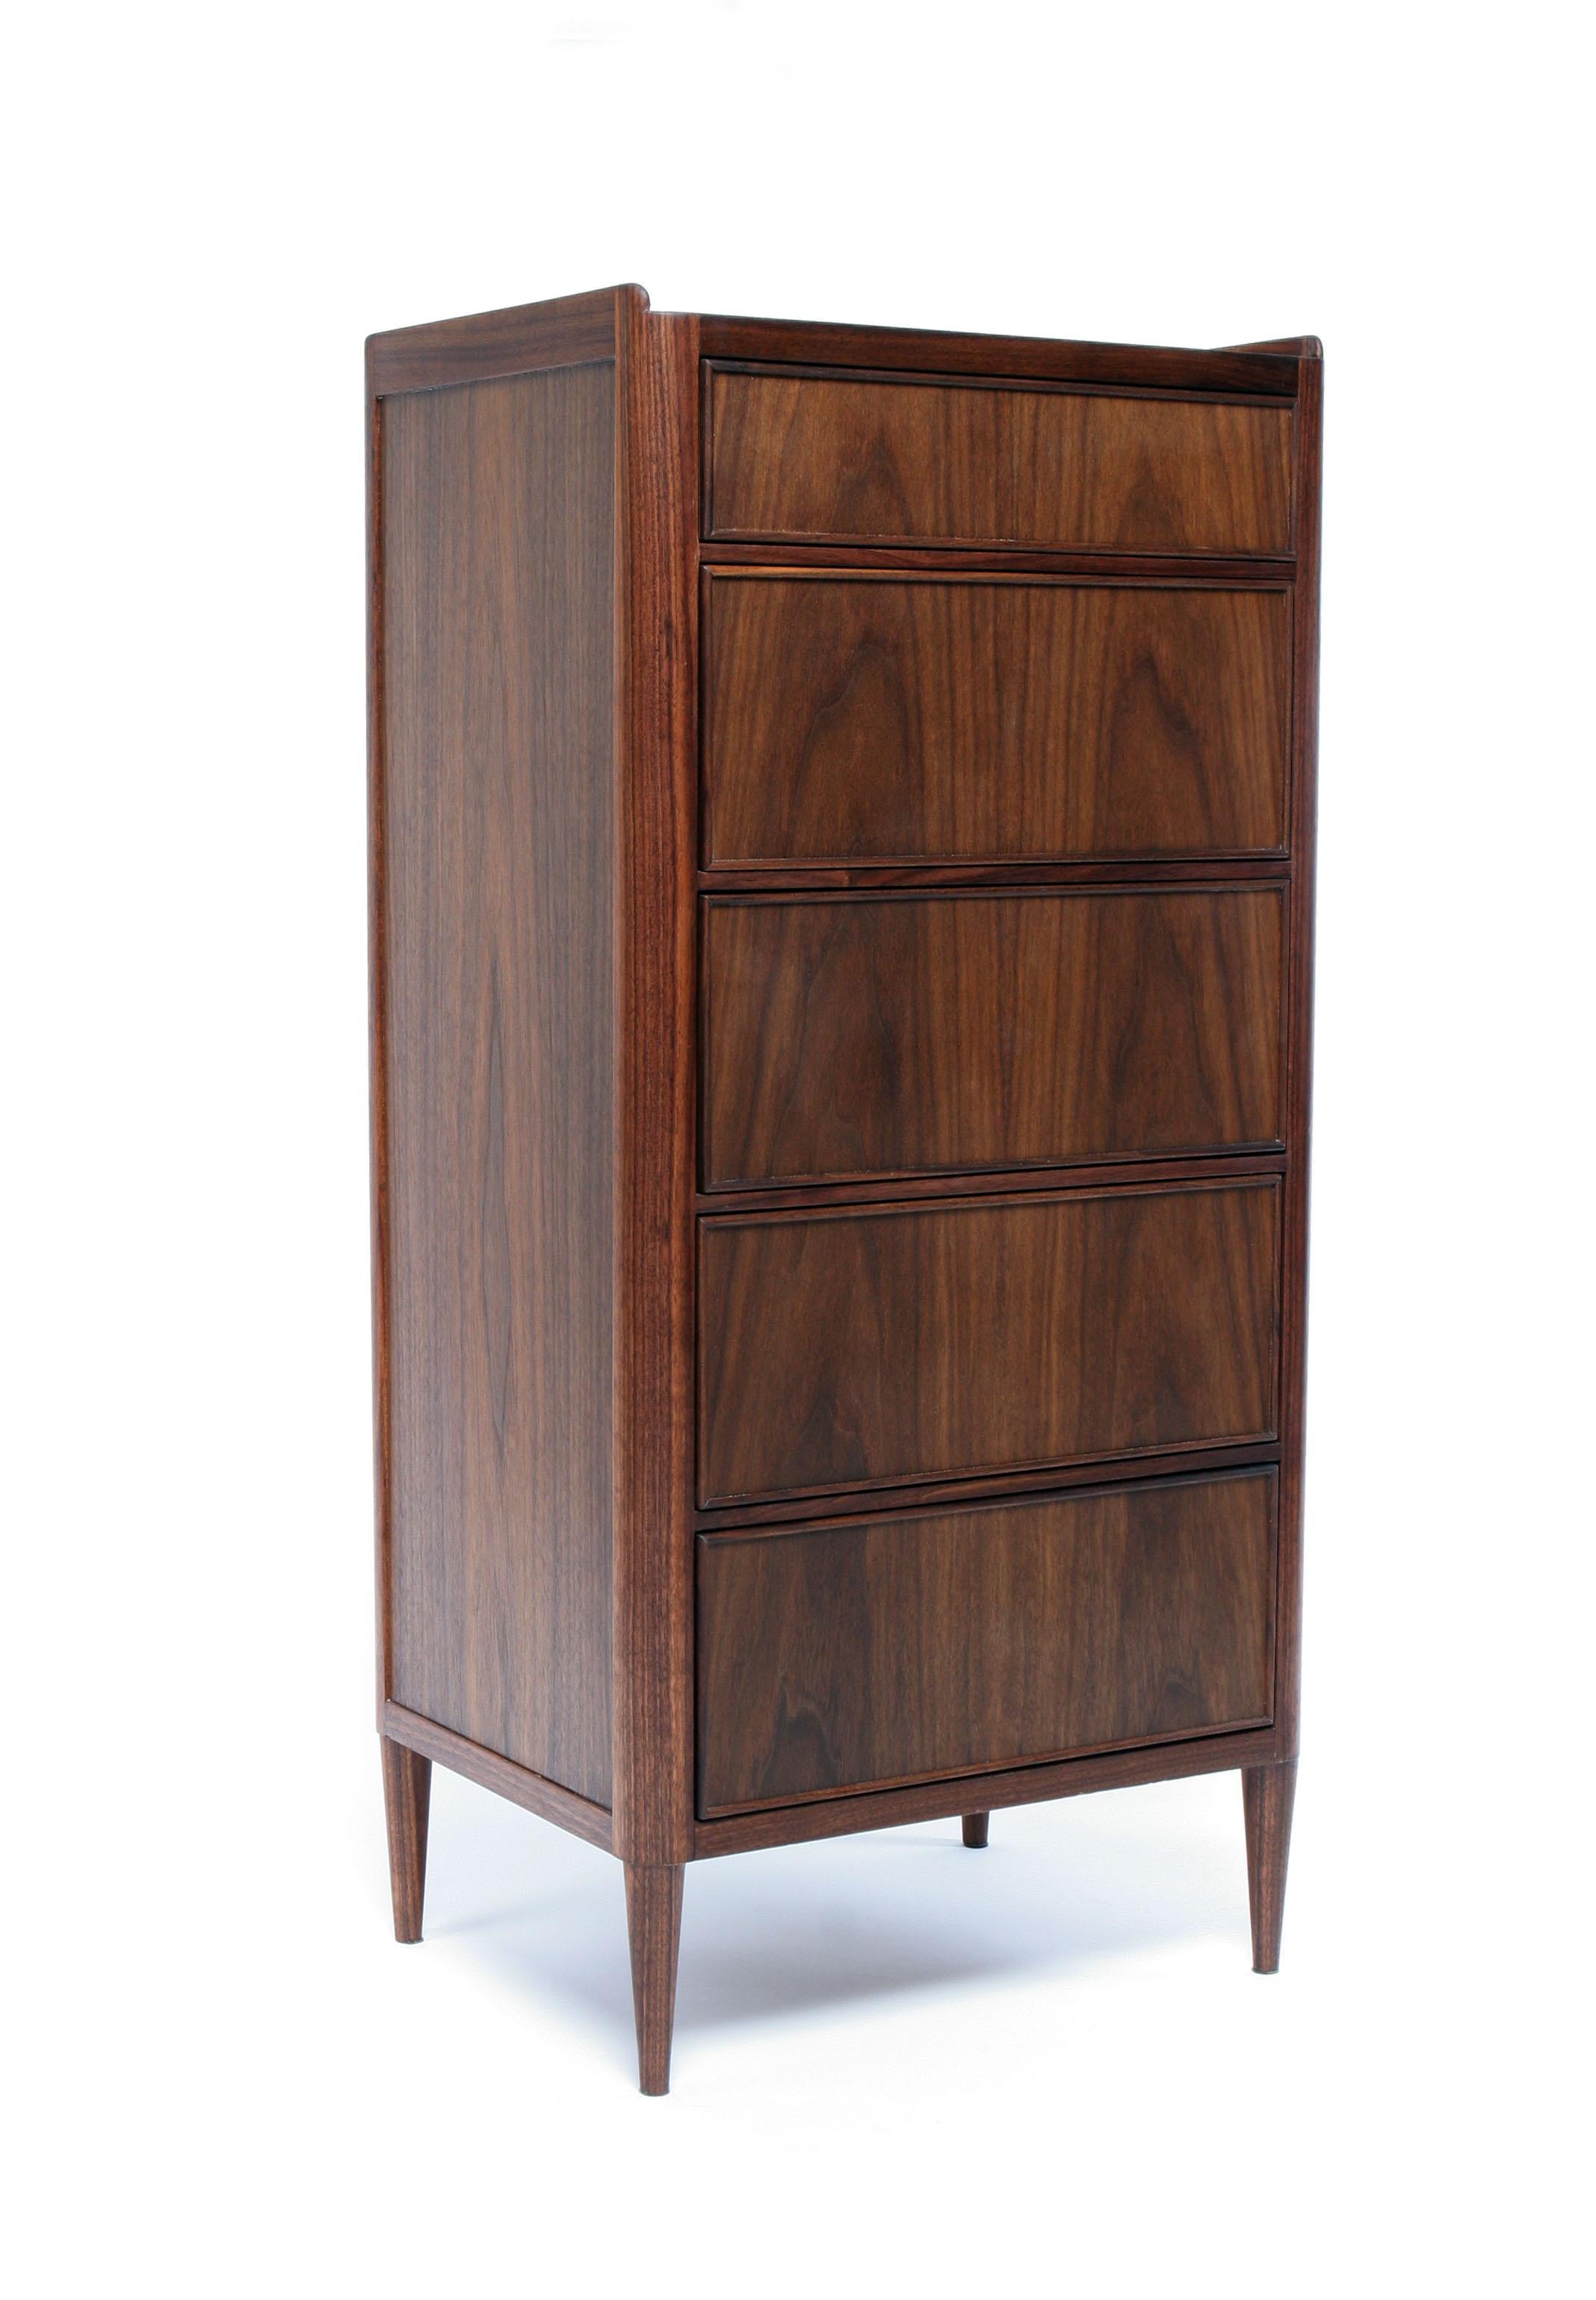 The Cyrus Cabinet features a frame made of hand-oiled solid walnut with inset panels of book-matched walnut veneer. The cabinet's five well proportioned drawers feature an all-around beading detail and touch-latch mechanism for opening. 

The